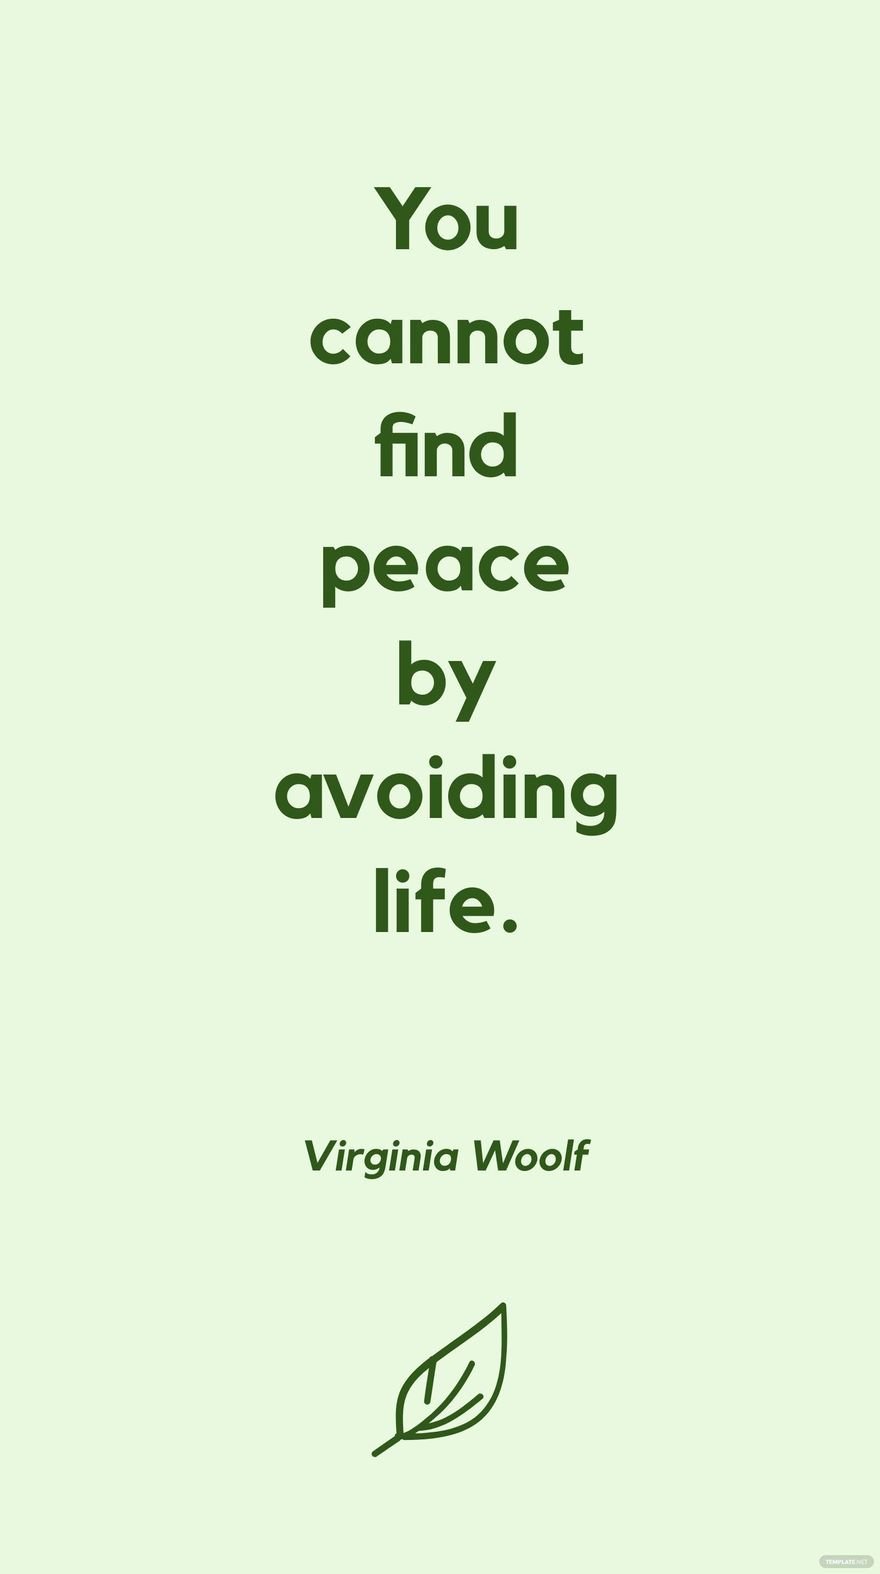 Virginia Woolf - You cannot find peace by avoiding life. in JPG